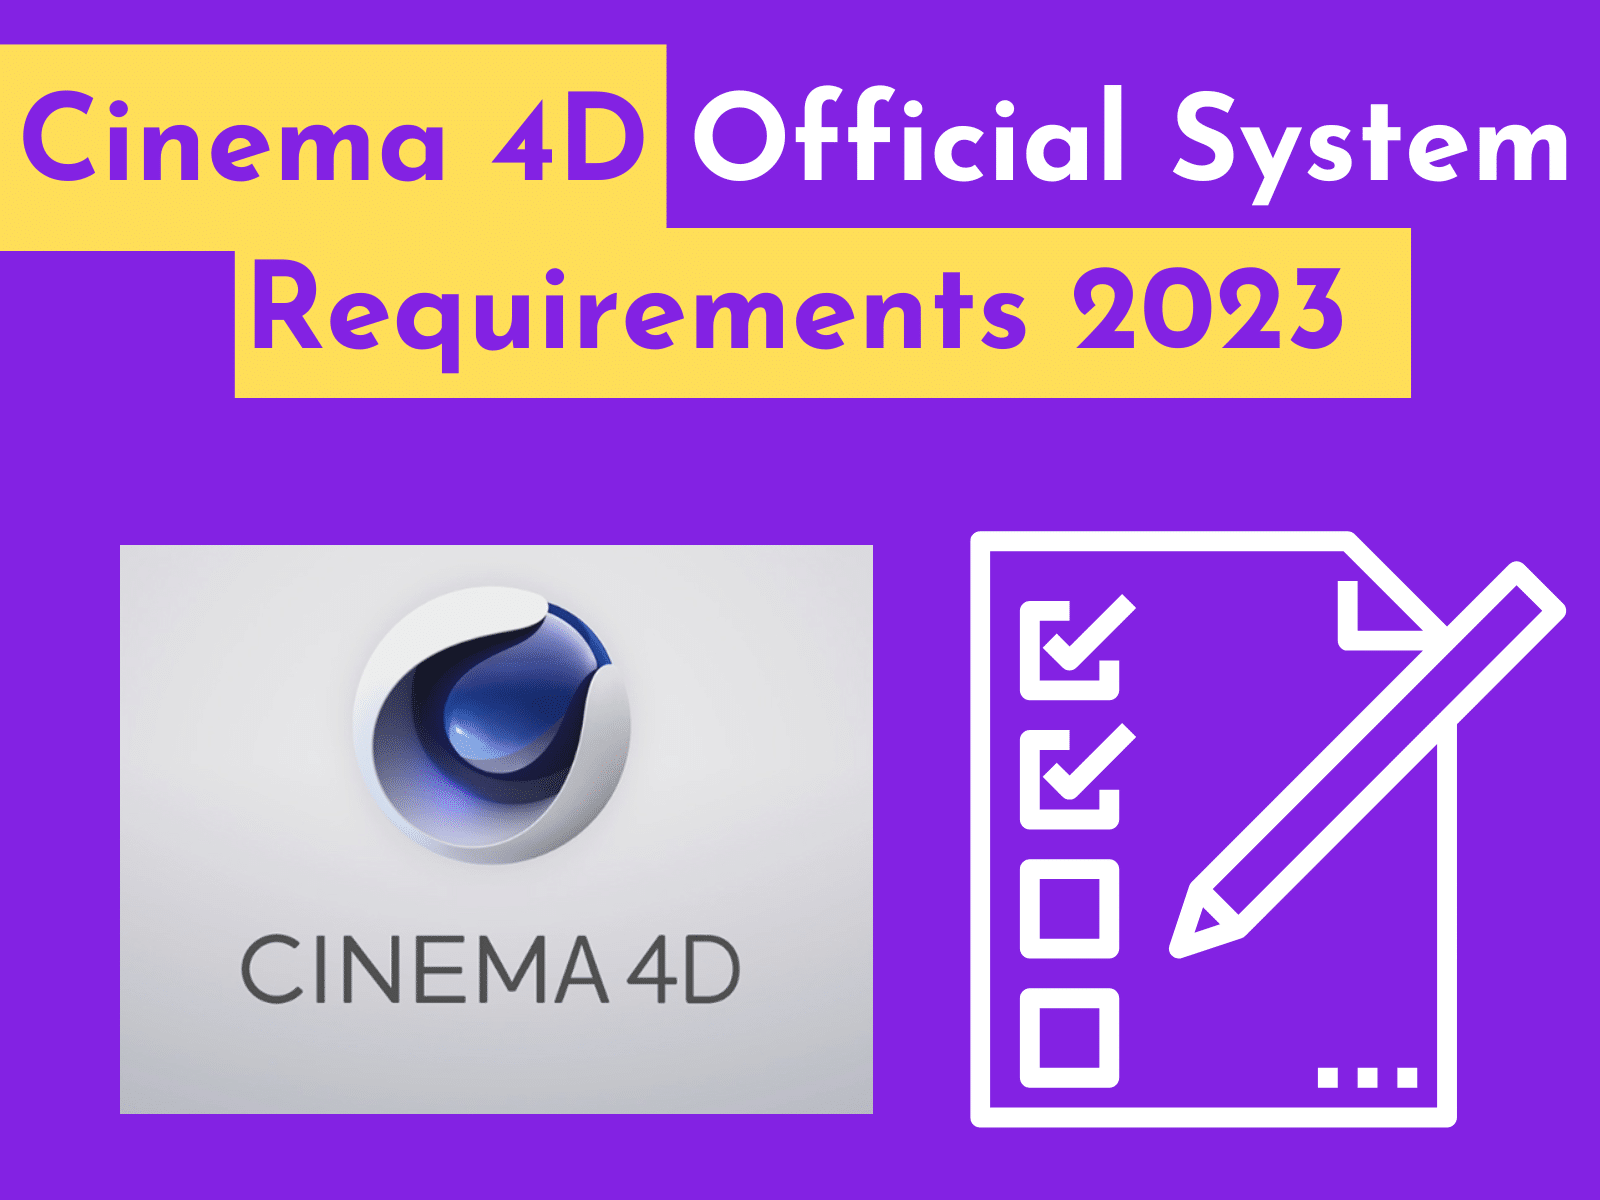 Cinema 4D Official System Requirements for Windows, MAC, and Linux.